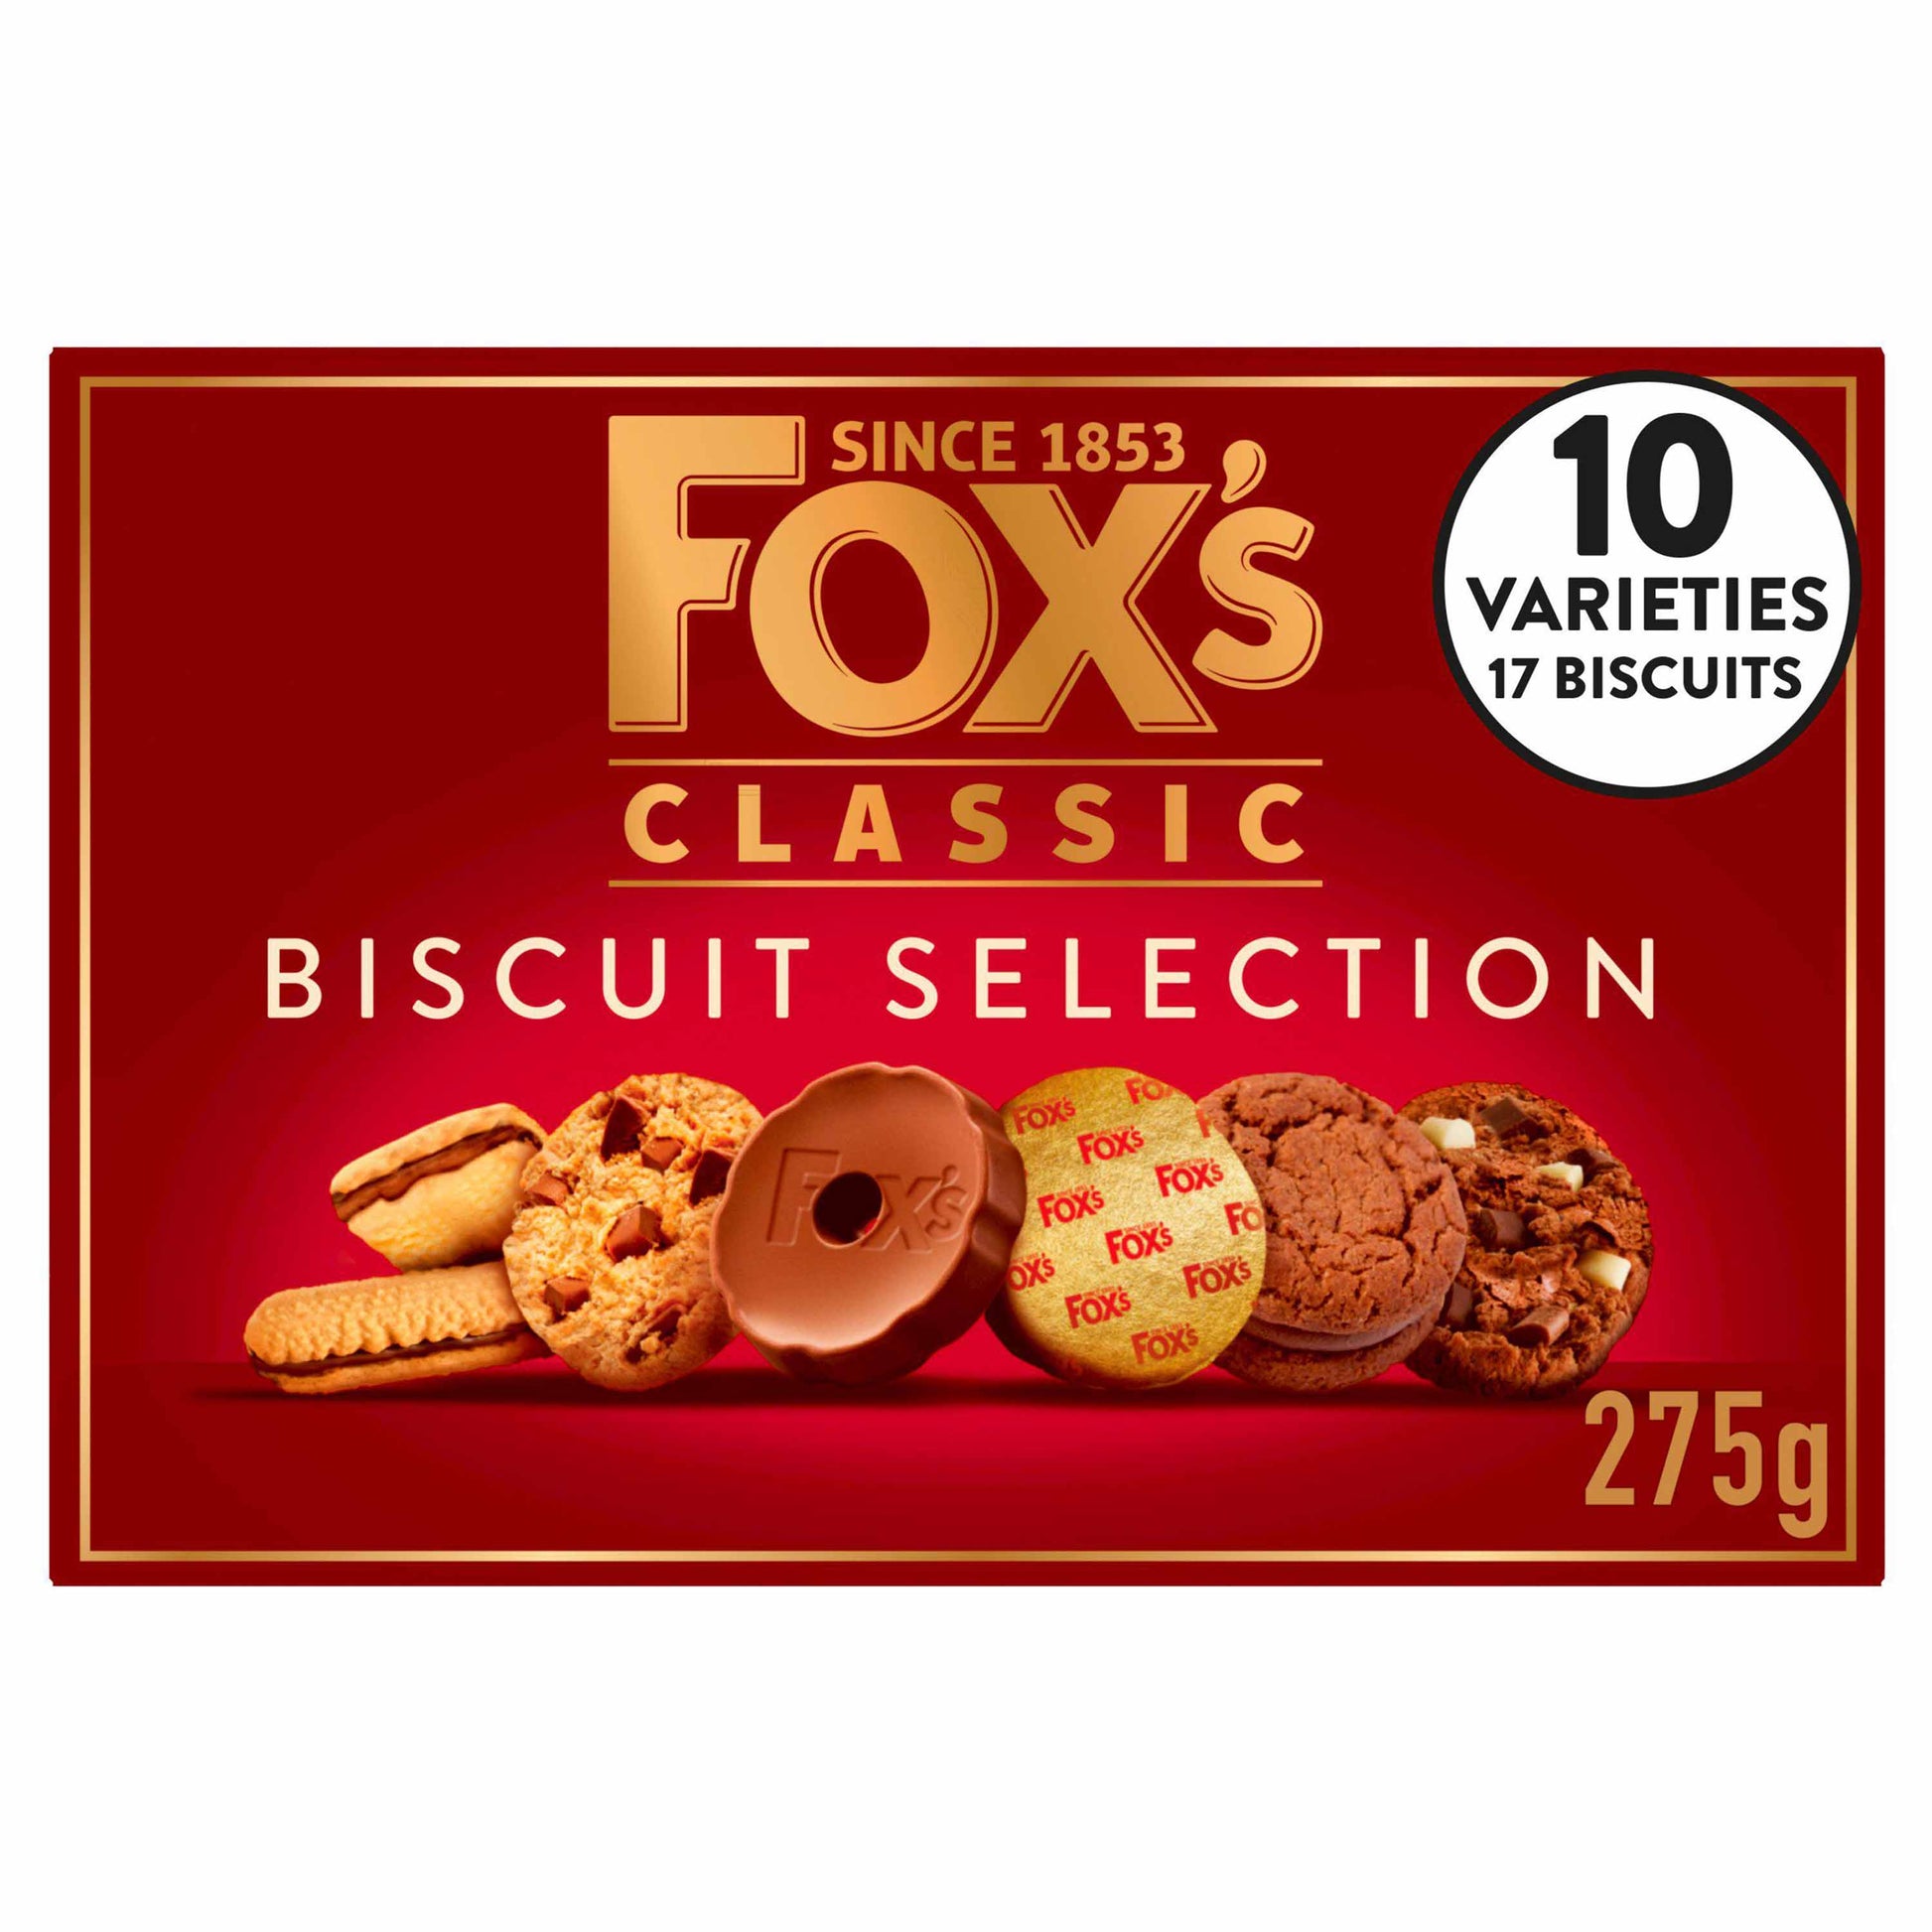 Fox's Biscuits Fabulous Selection 275g - Gift Message